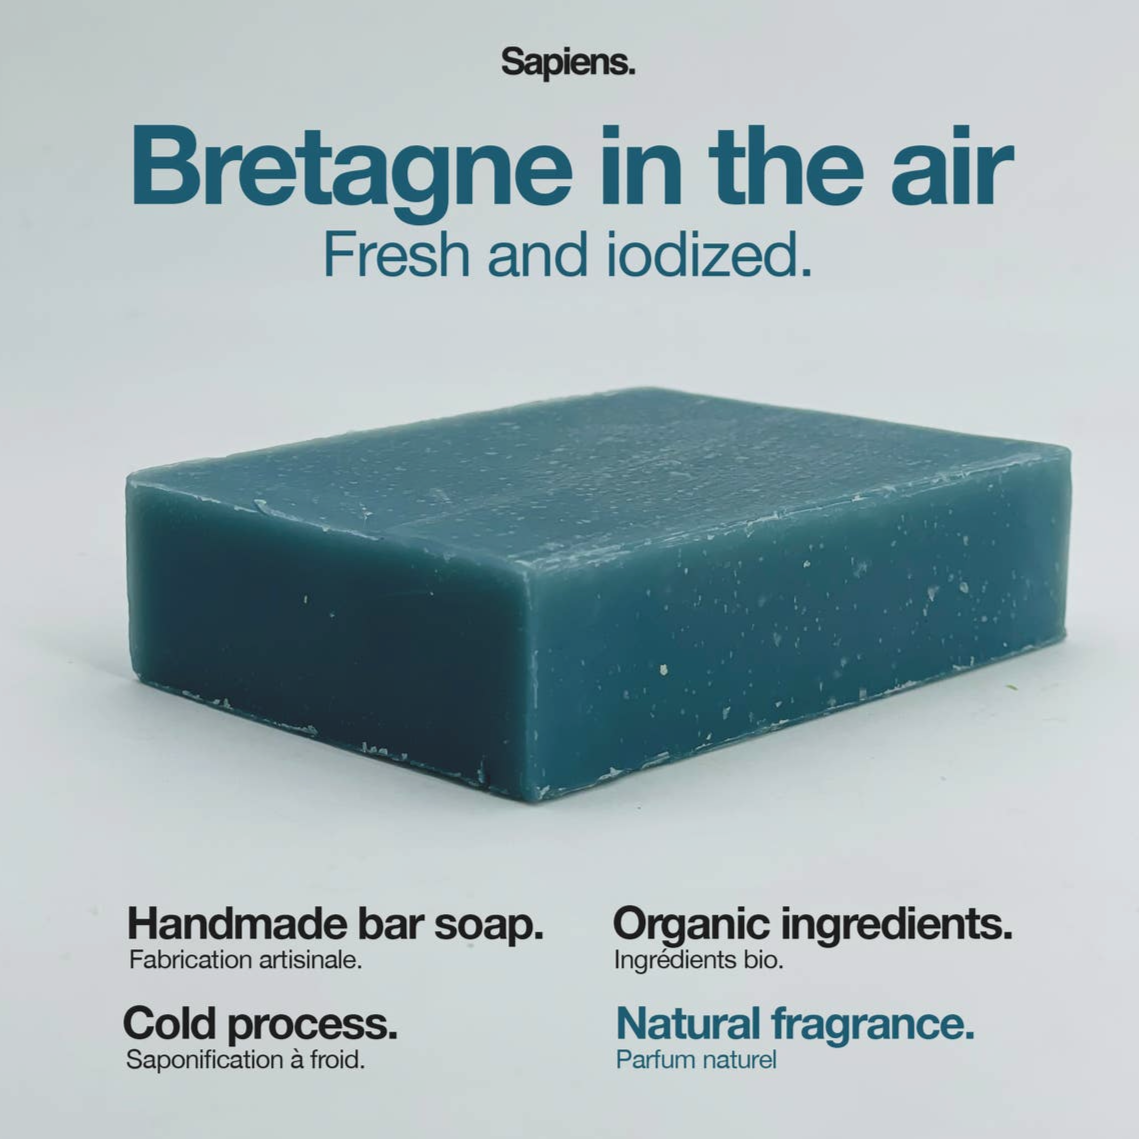 Sapiens Bar Soap Bretagne In The Air - Genuine Design luxury consignment Calgary, Alberta, Canada New & pre-owned clothing, shoes, accessories.